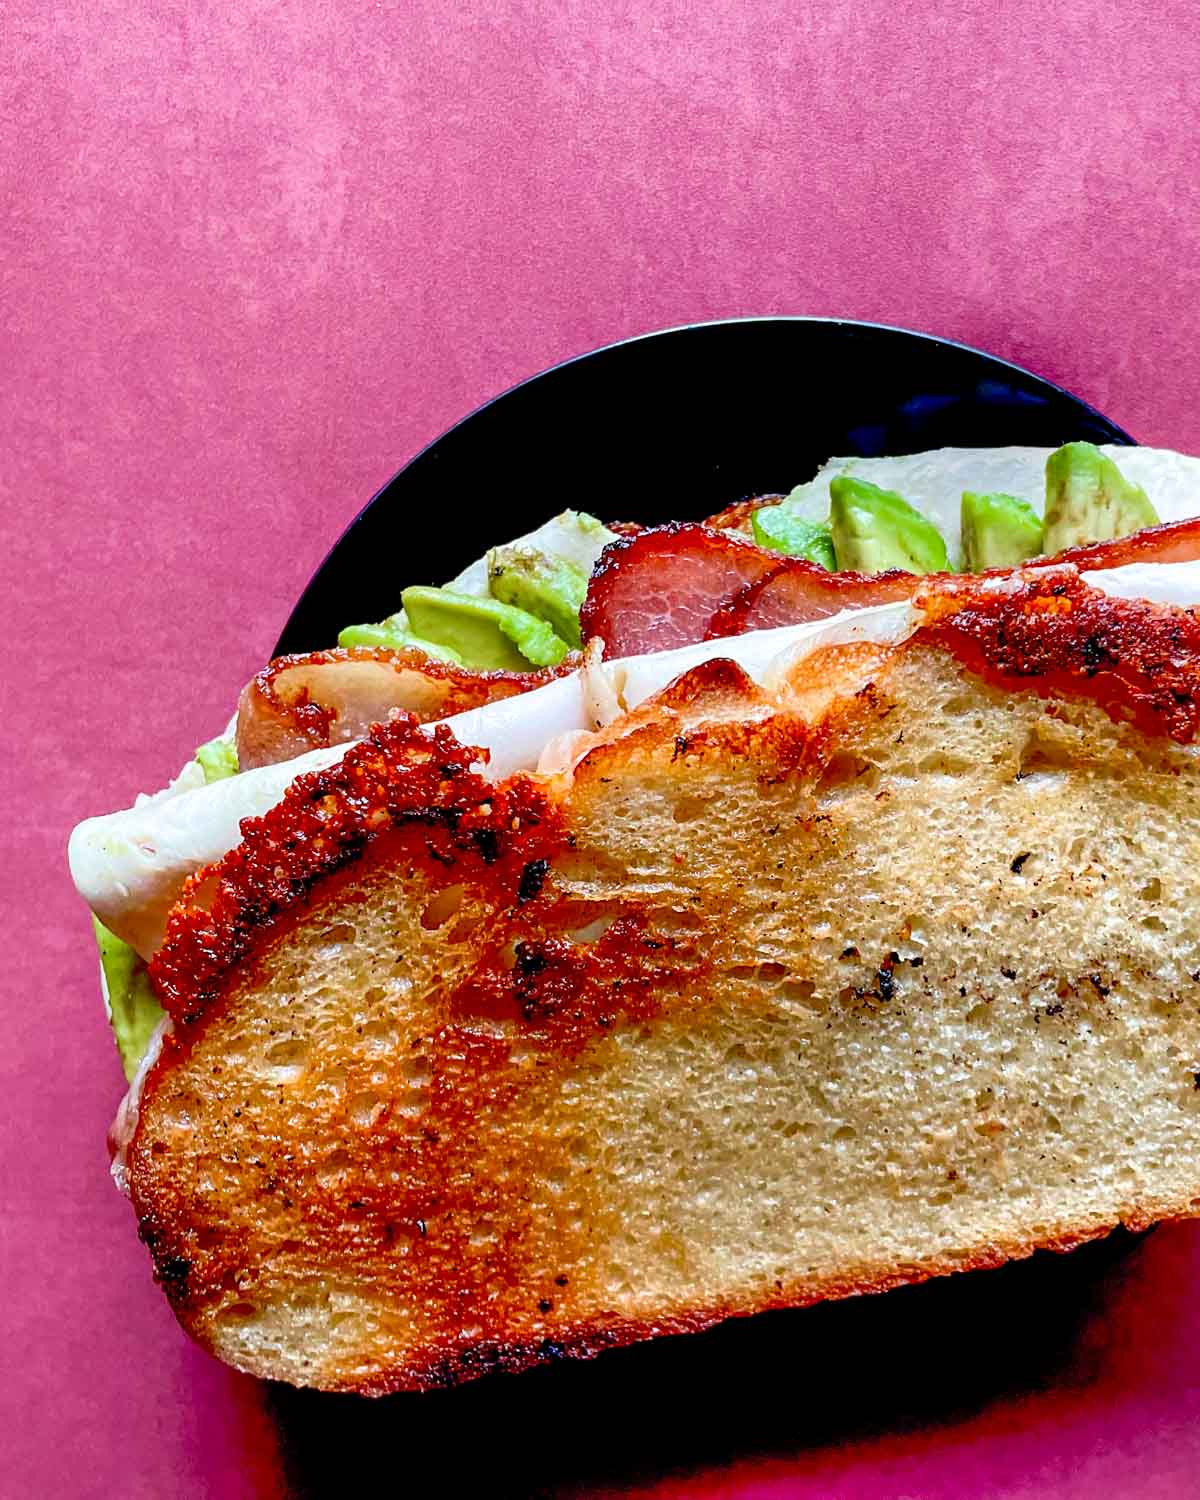 The toasted turkey avocado sandwich is shown from above on a red background.